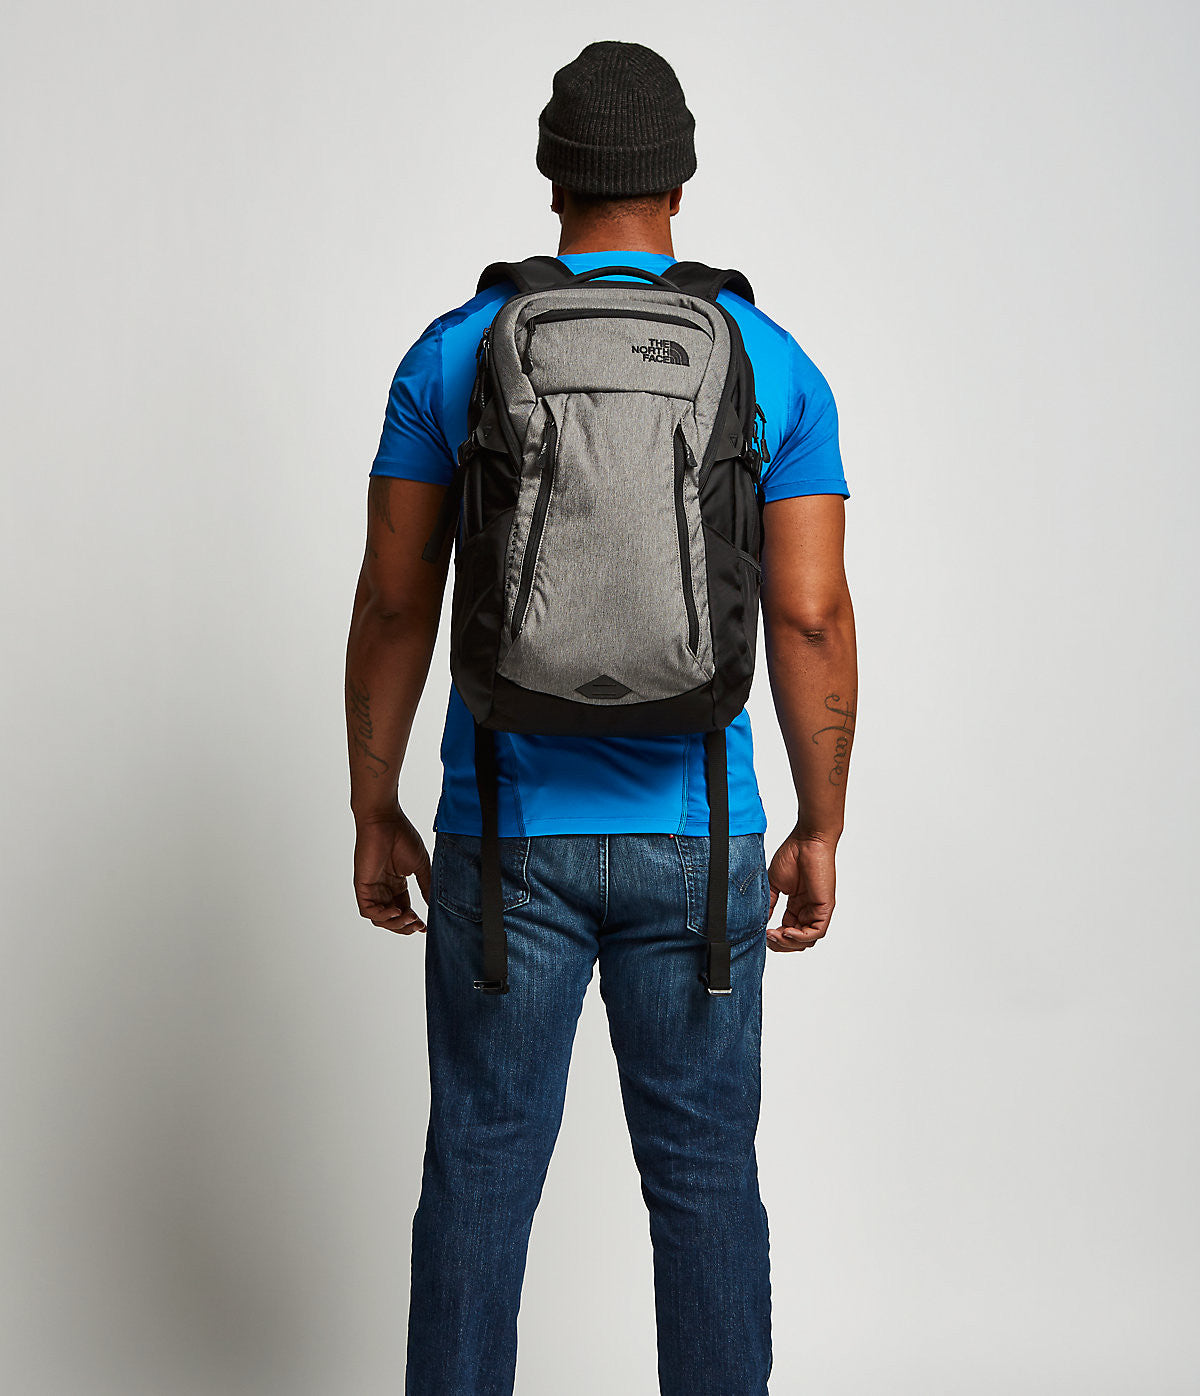 router transit backpack